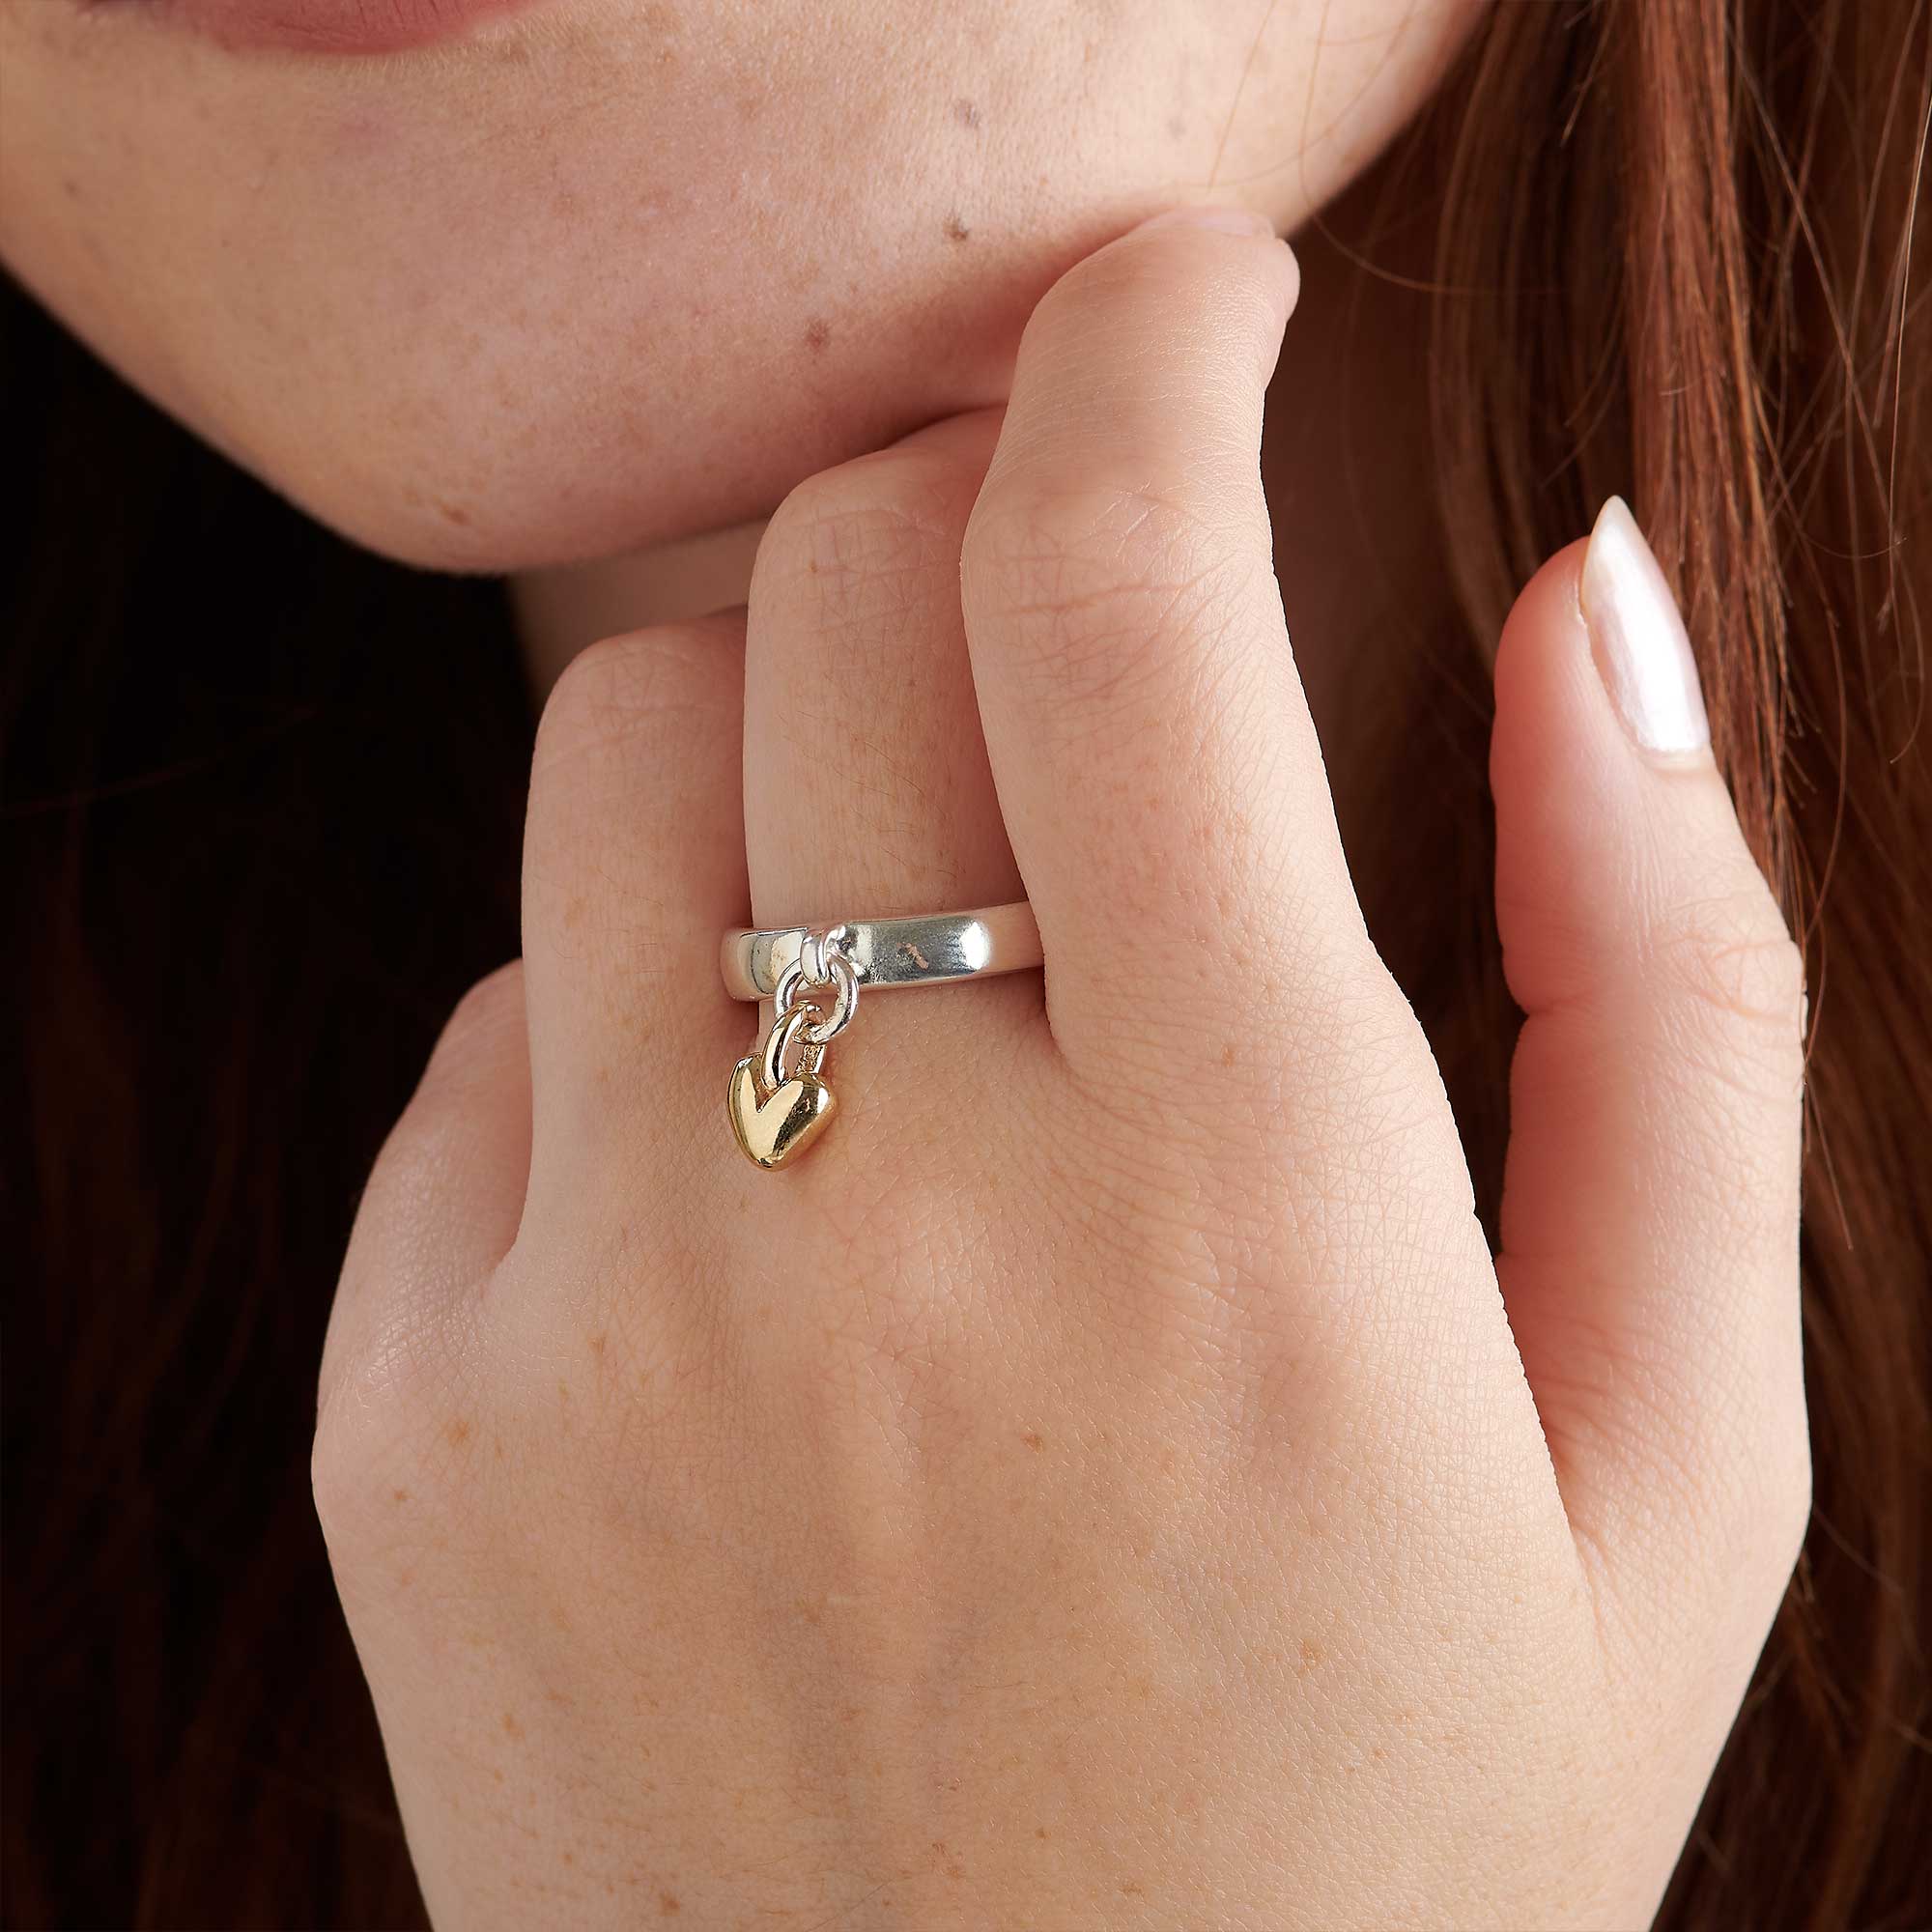 solid silver & recycled solid gold heart charm ring designer womens scarlett jewellery UK